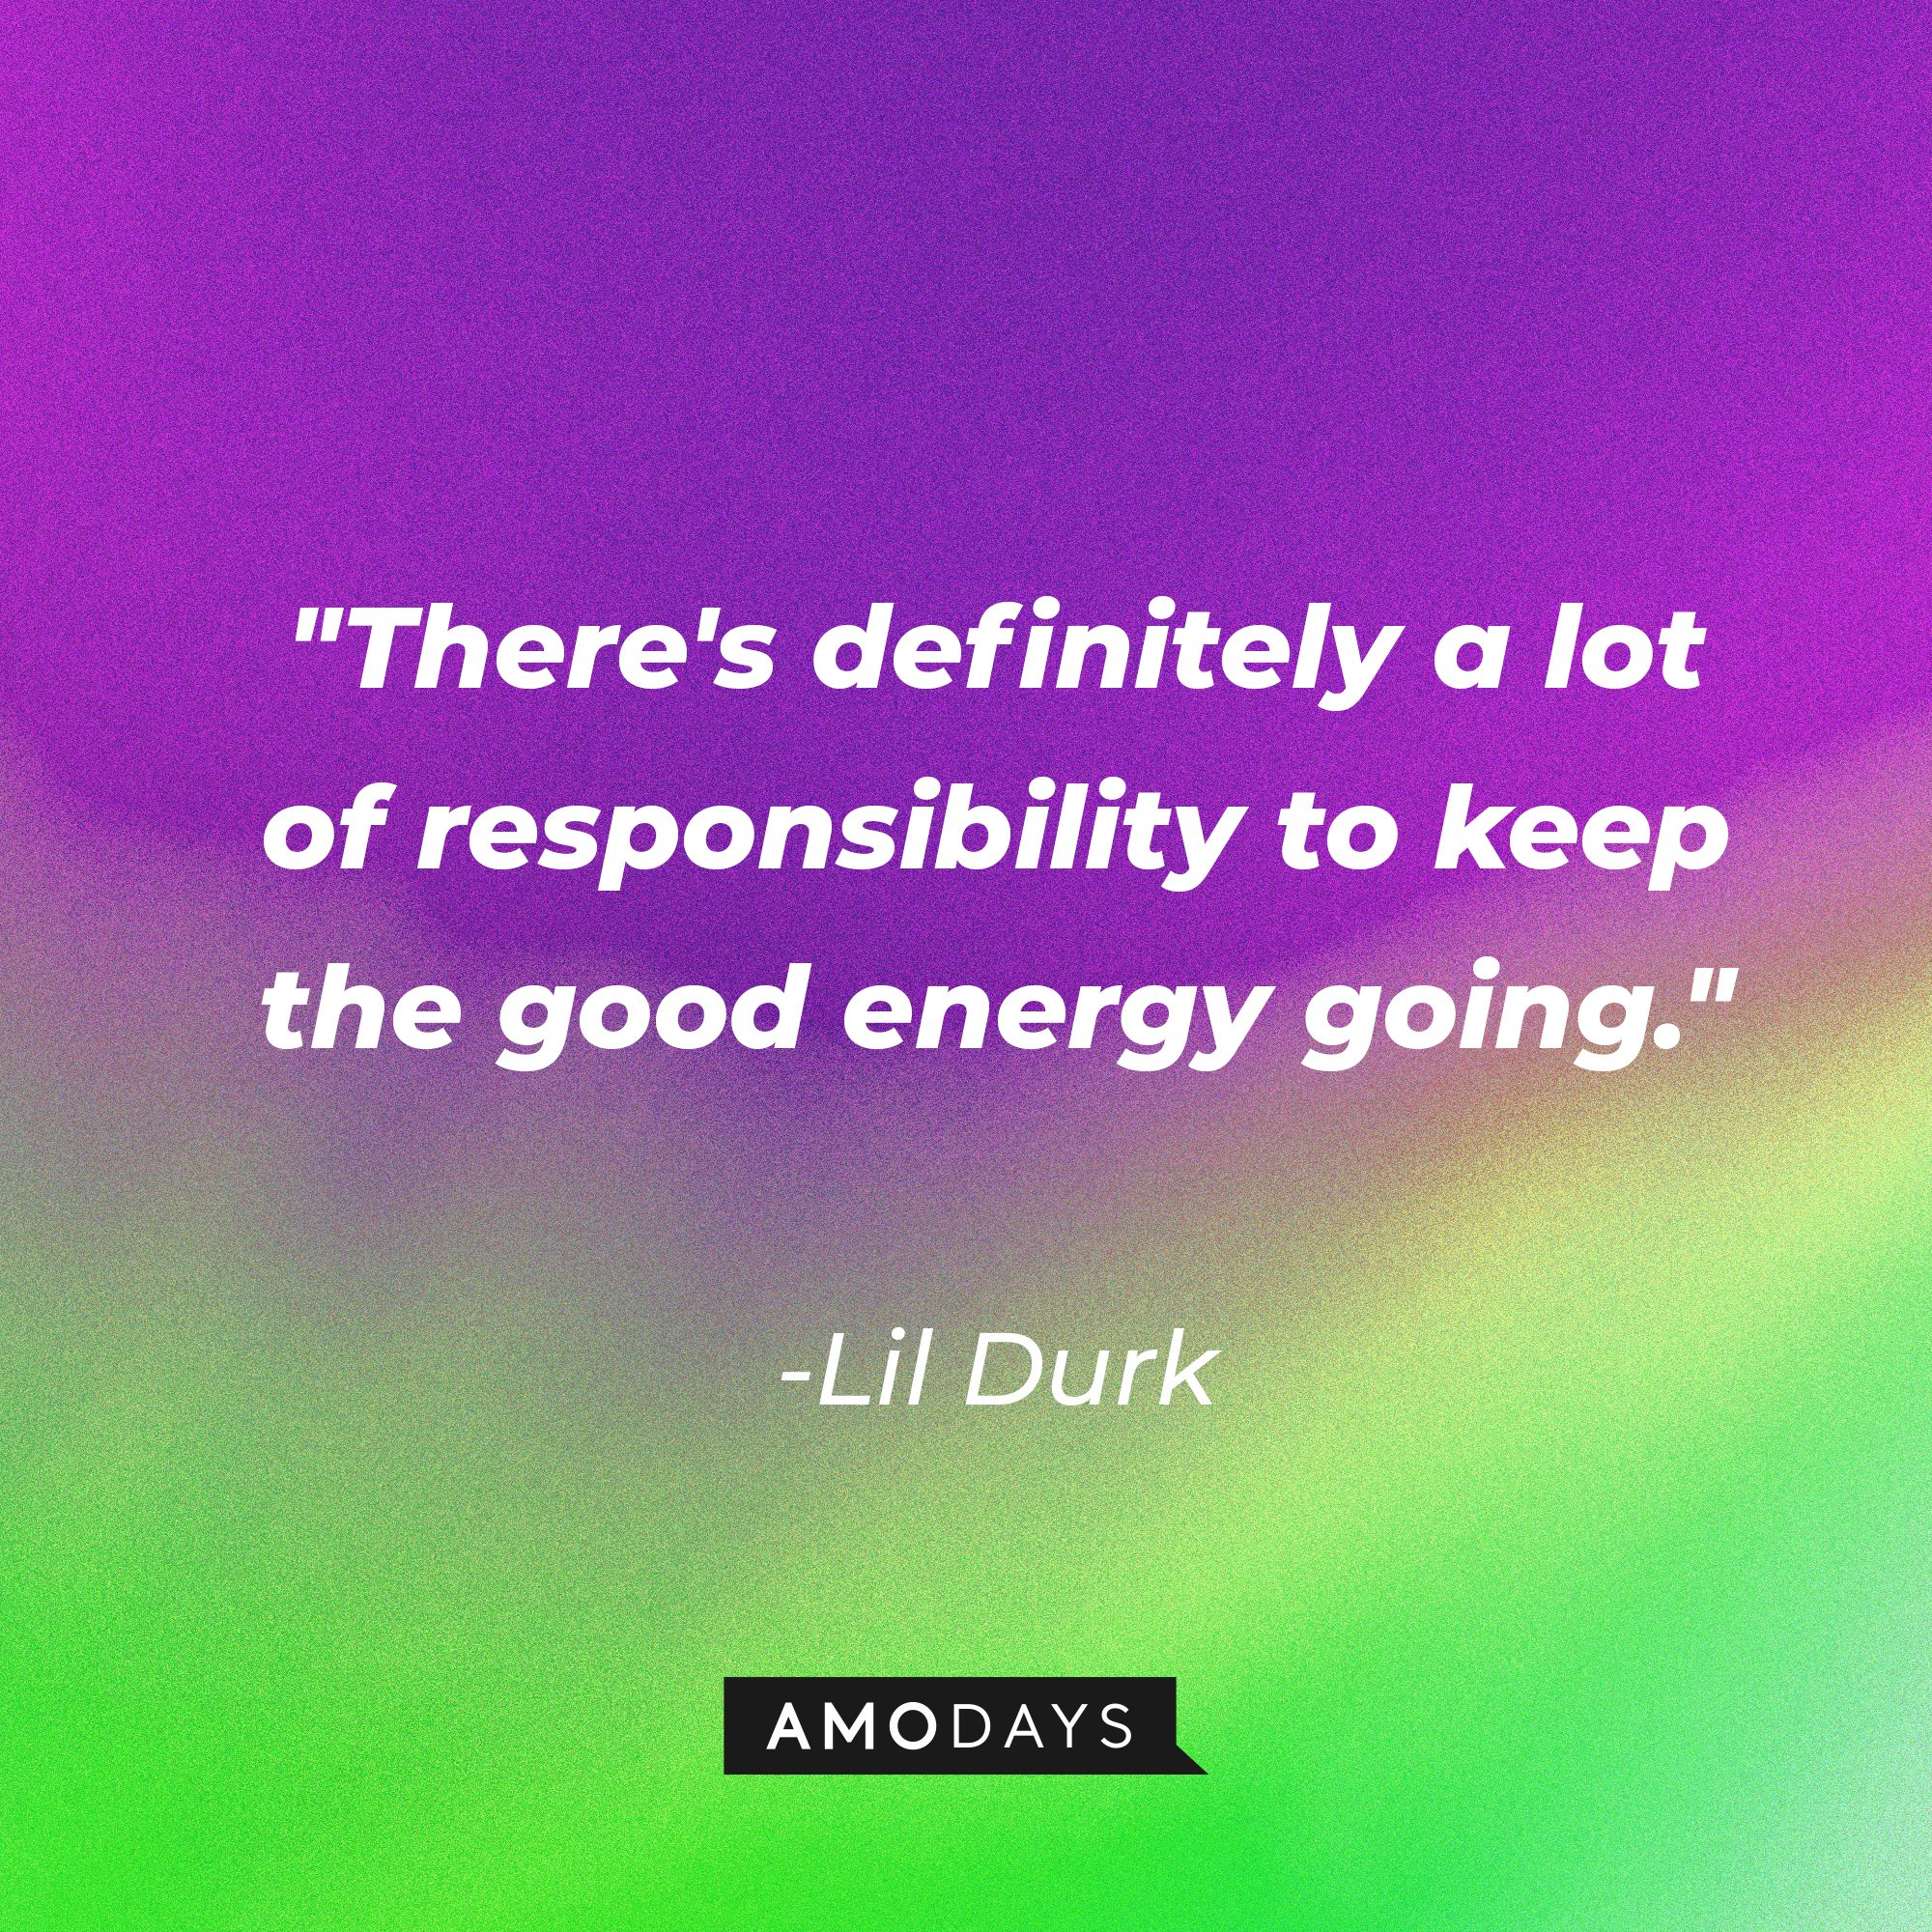 Lil Durk’s quote: "There's definitely a lot of responsibility to keep the good energy going." | Image: AmoDays